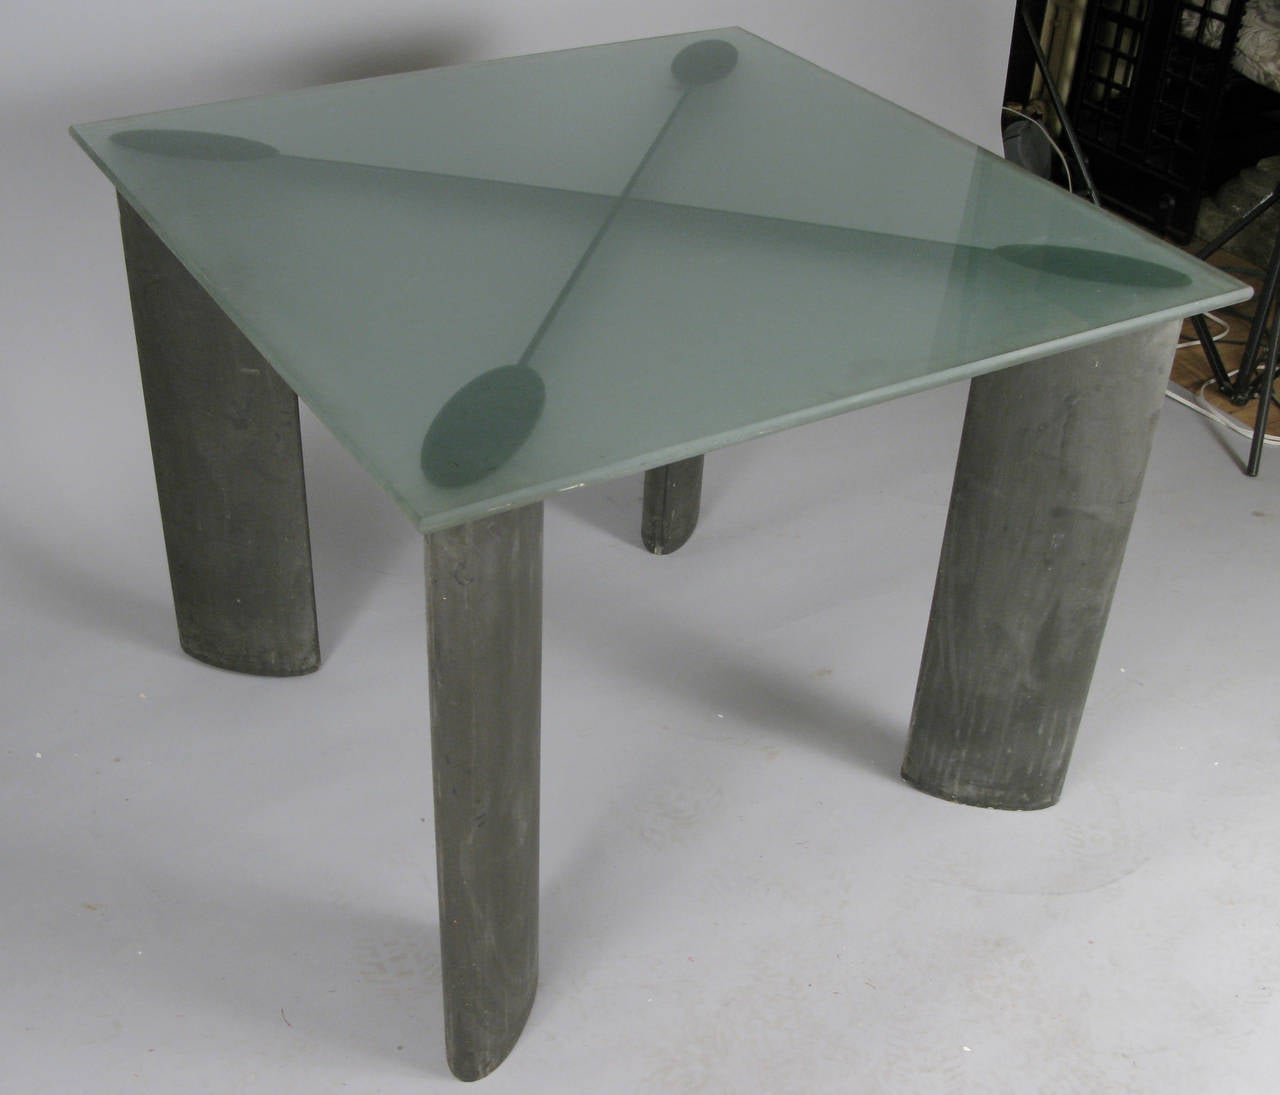 Late 20th Century Modern Aluminum and Glass Table by Koch & Lowy